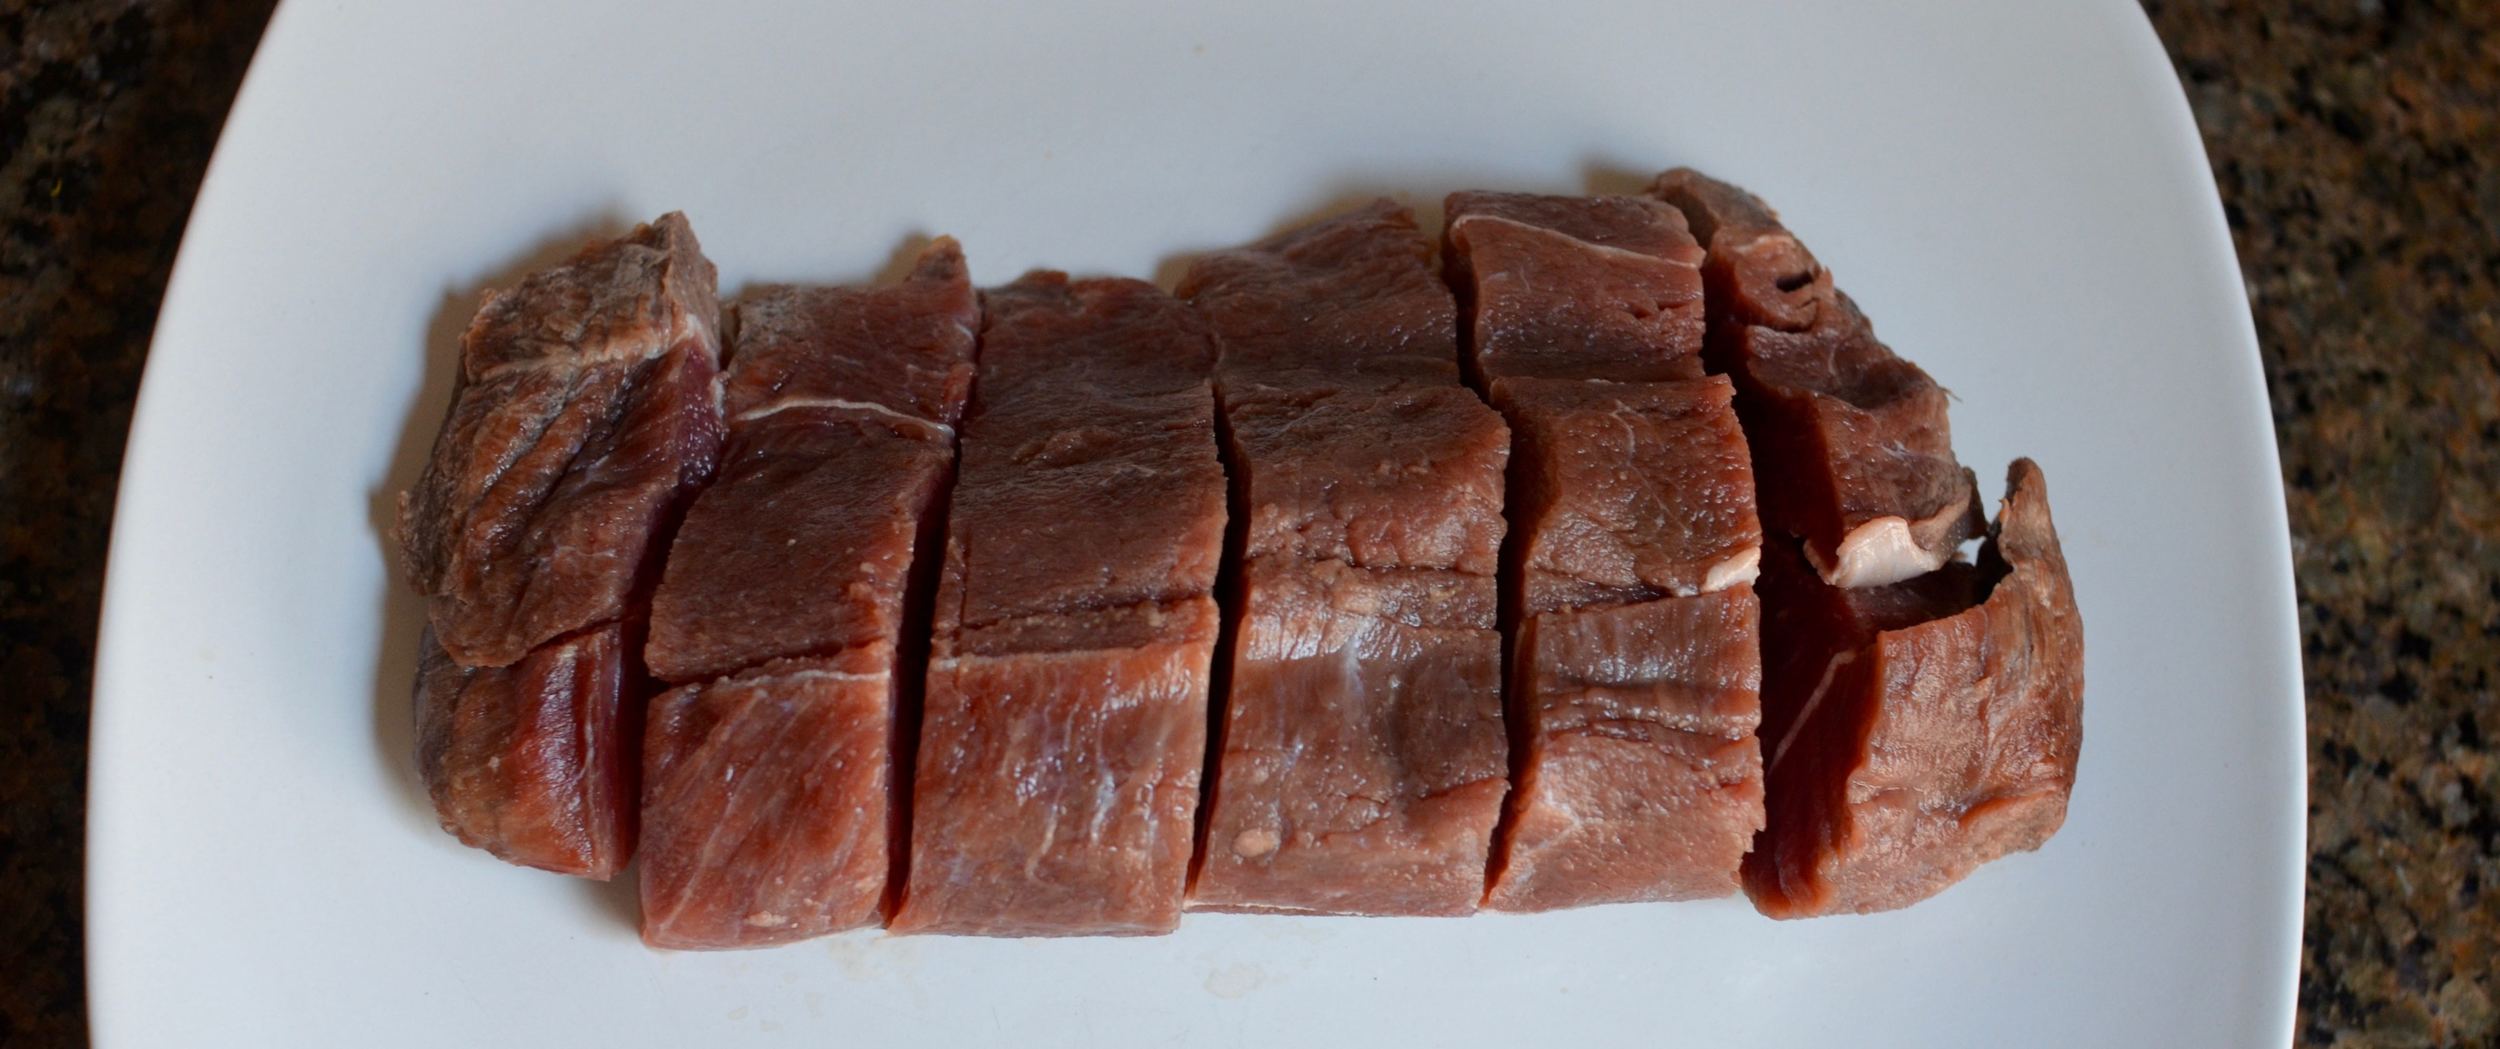  Sliced steak, about 1 x 1 x 3 inches. You can make smaller pieces or keep it as one whole steak. 